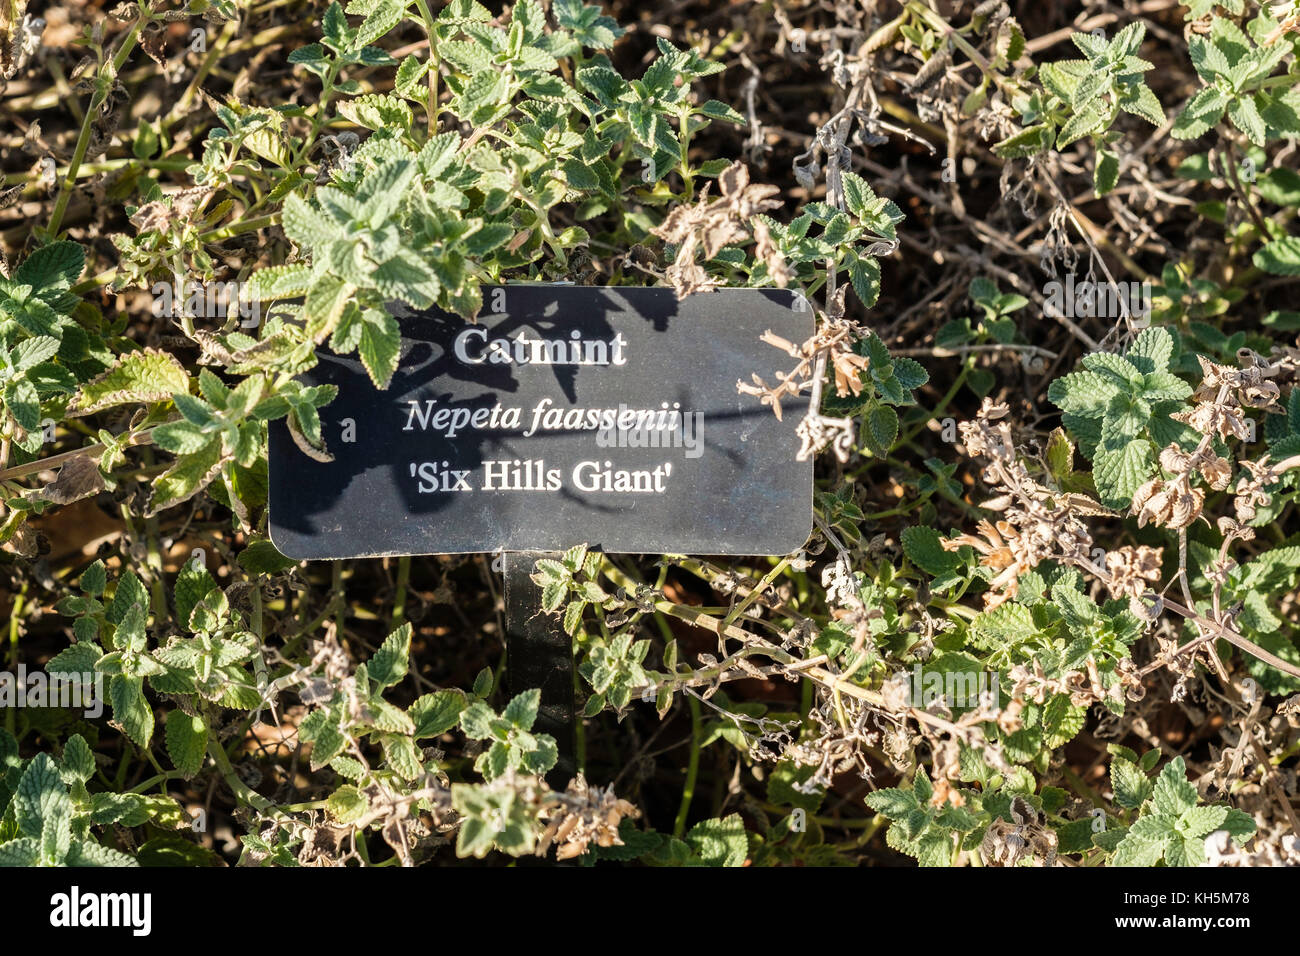 A labeled bed of Catmint, Nepeta x faassenii, Six Hills Giant. Winter stage after a freeze with no blooms. Oklahoma, USA. Stock Photo